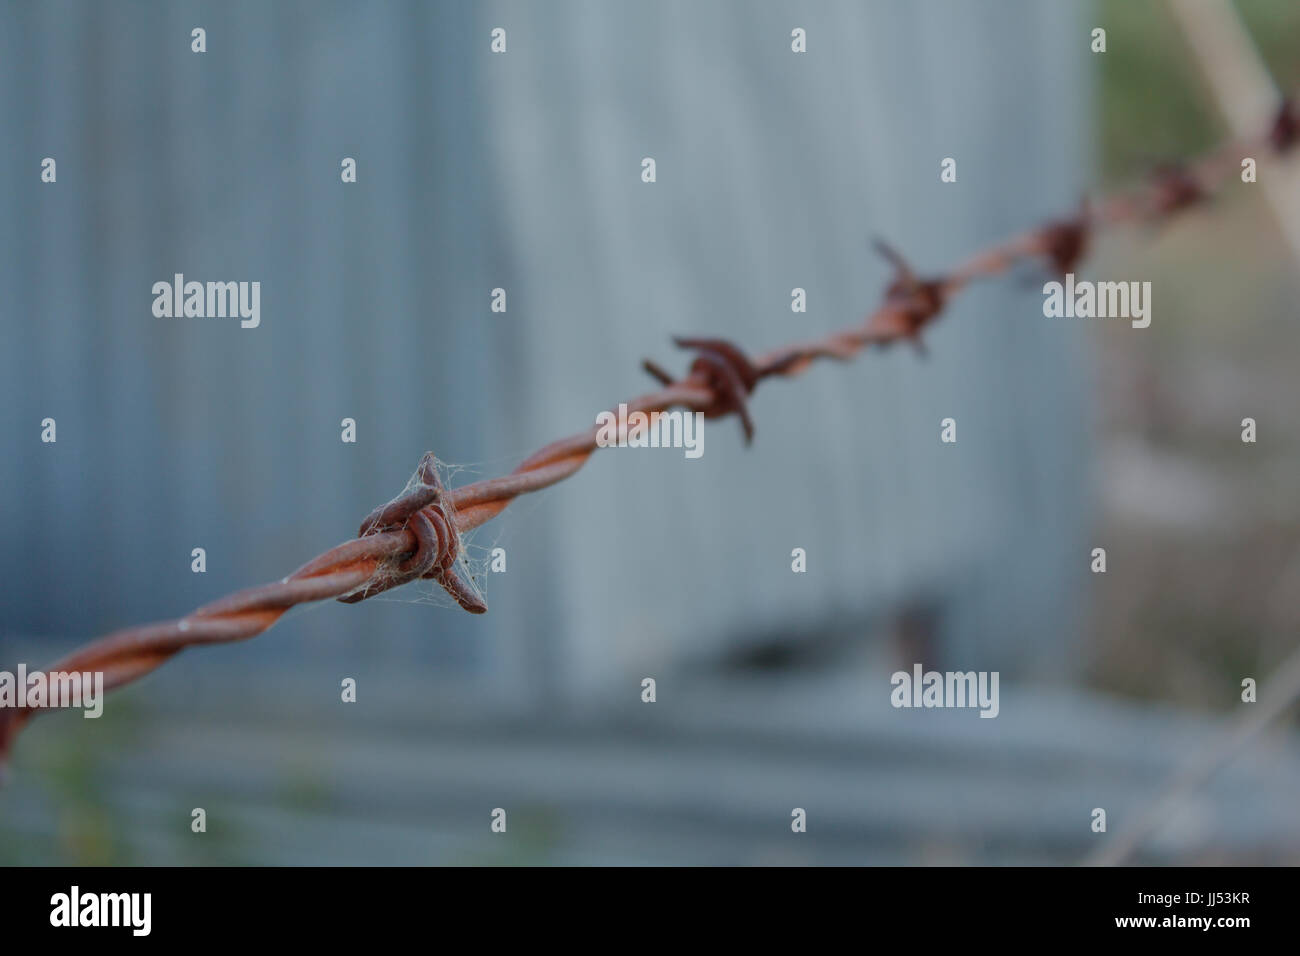 A rusty barbed wire line of fence with cobwebs on it. The background is blurred grey from an old corregated iron shed and blurred green weeds. Stock Photo